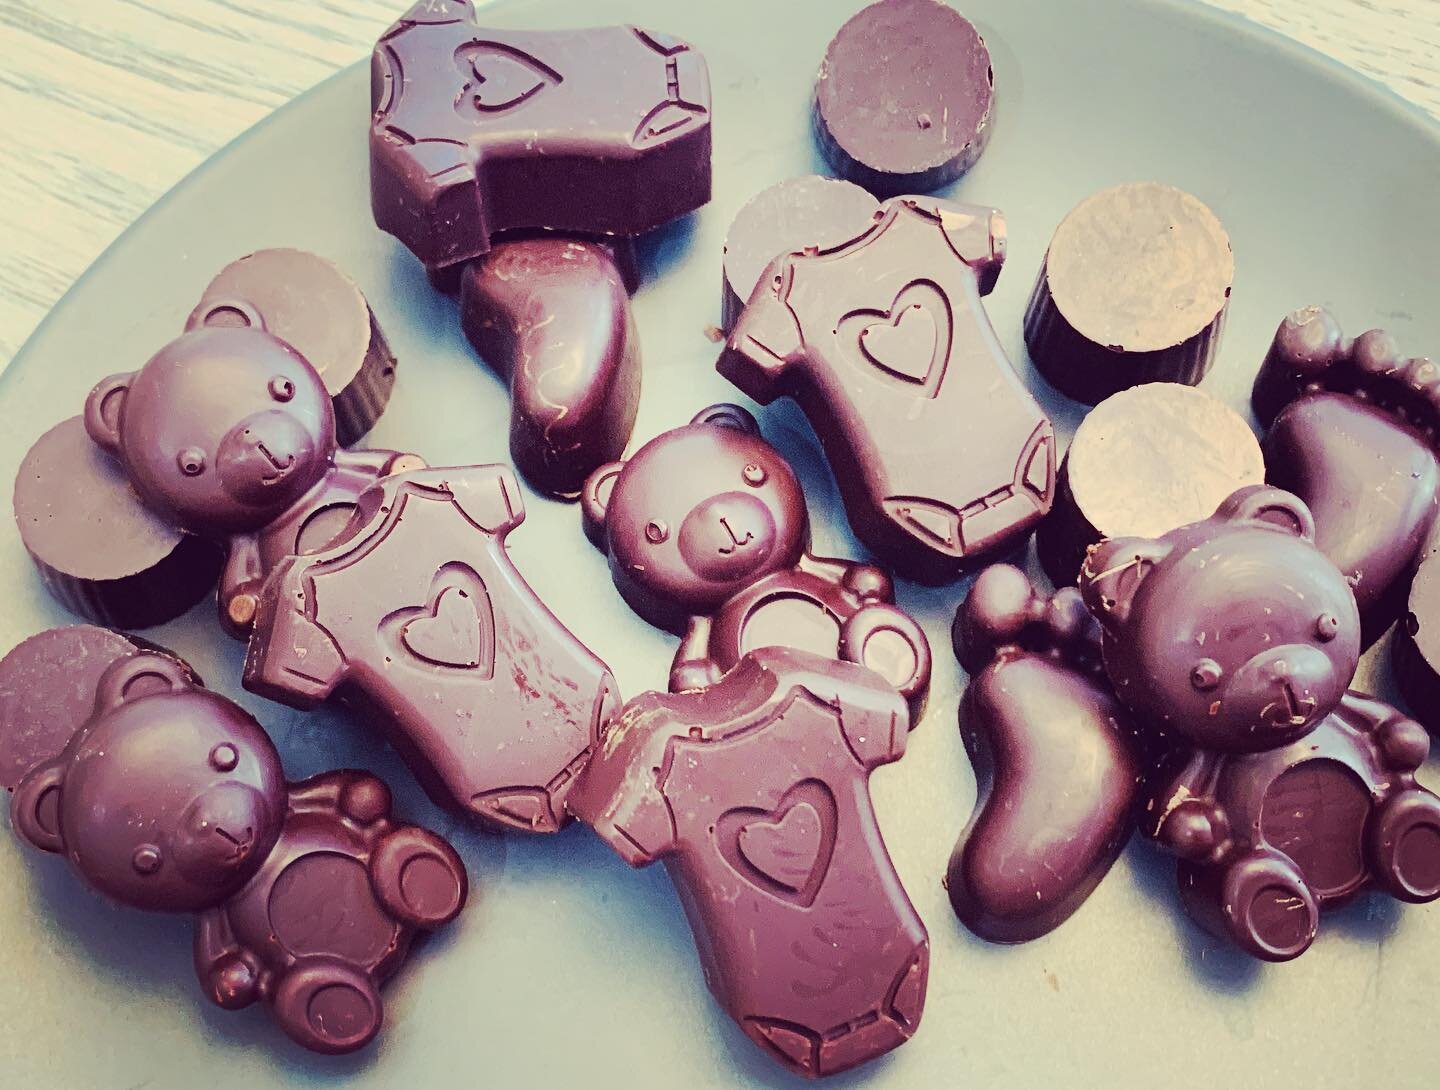 Cute and delicious dark chocolate  for baby shower- with a hint of cinnamon nutmeg and clove 😋 #veganchocolate #darkchocolate